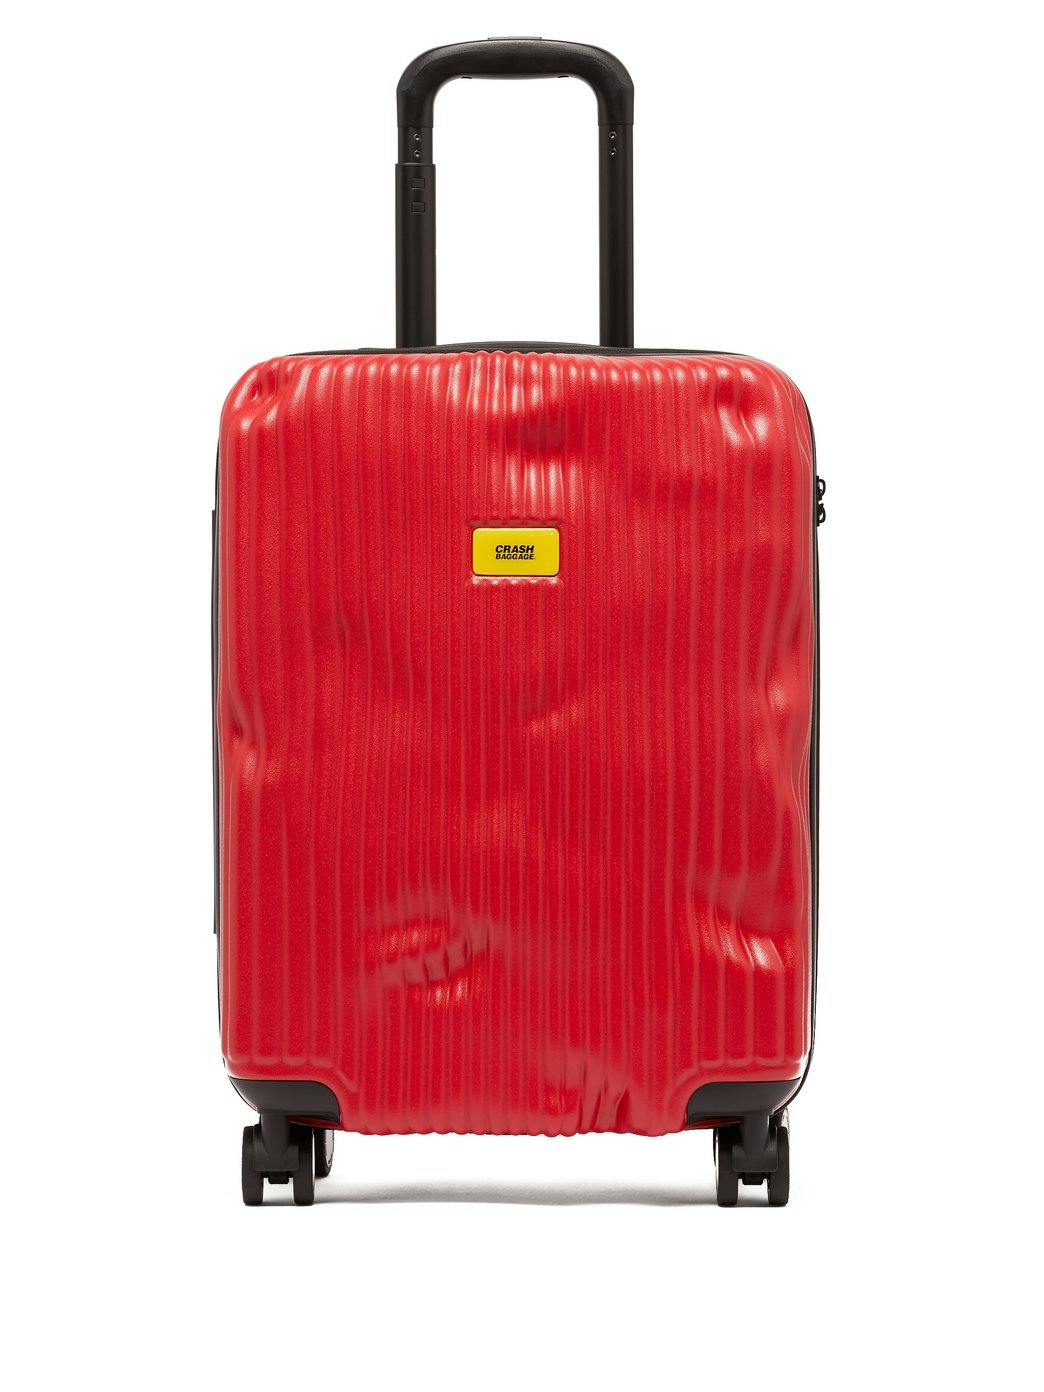 The most stylish luggage to kick start your holiday